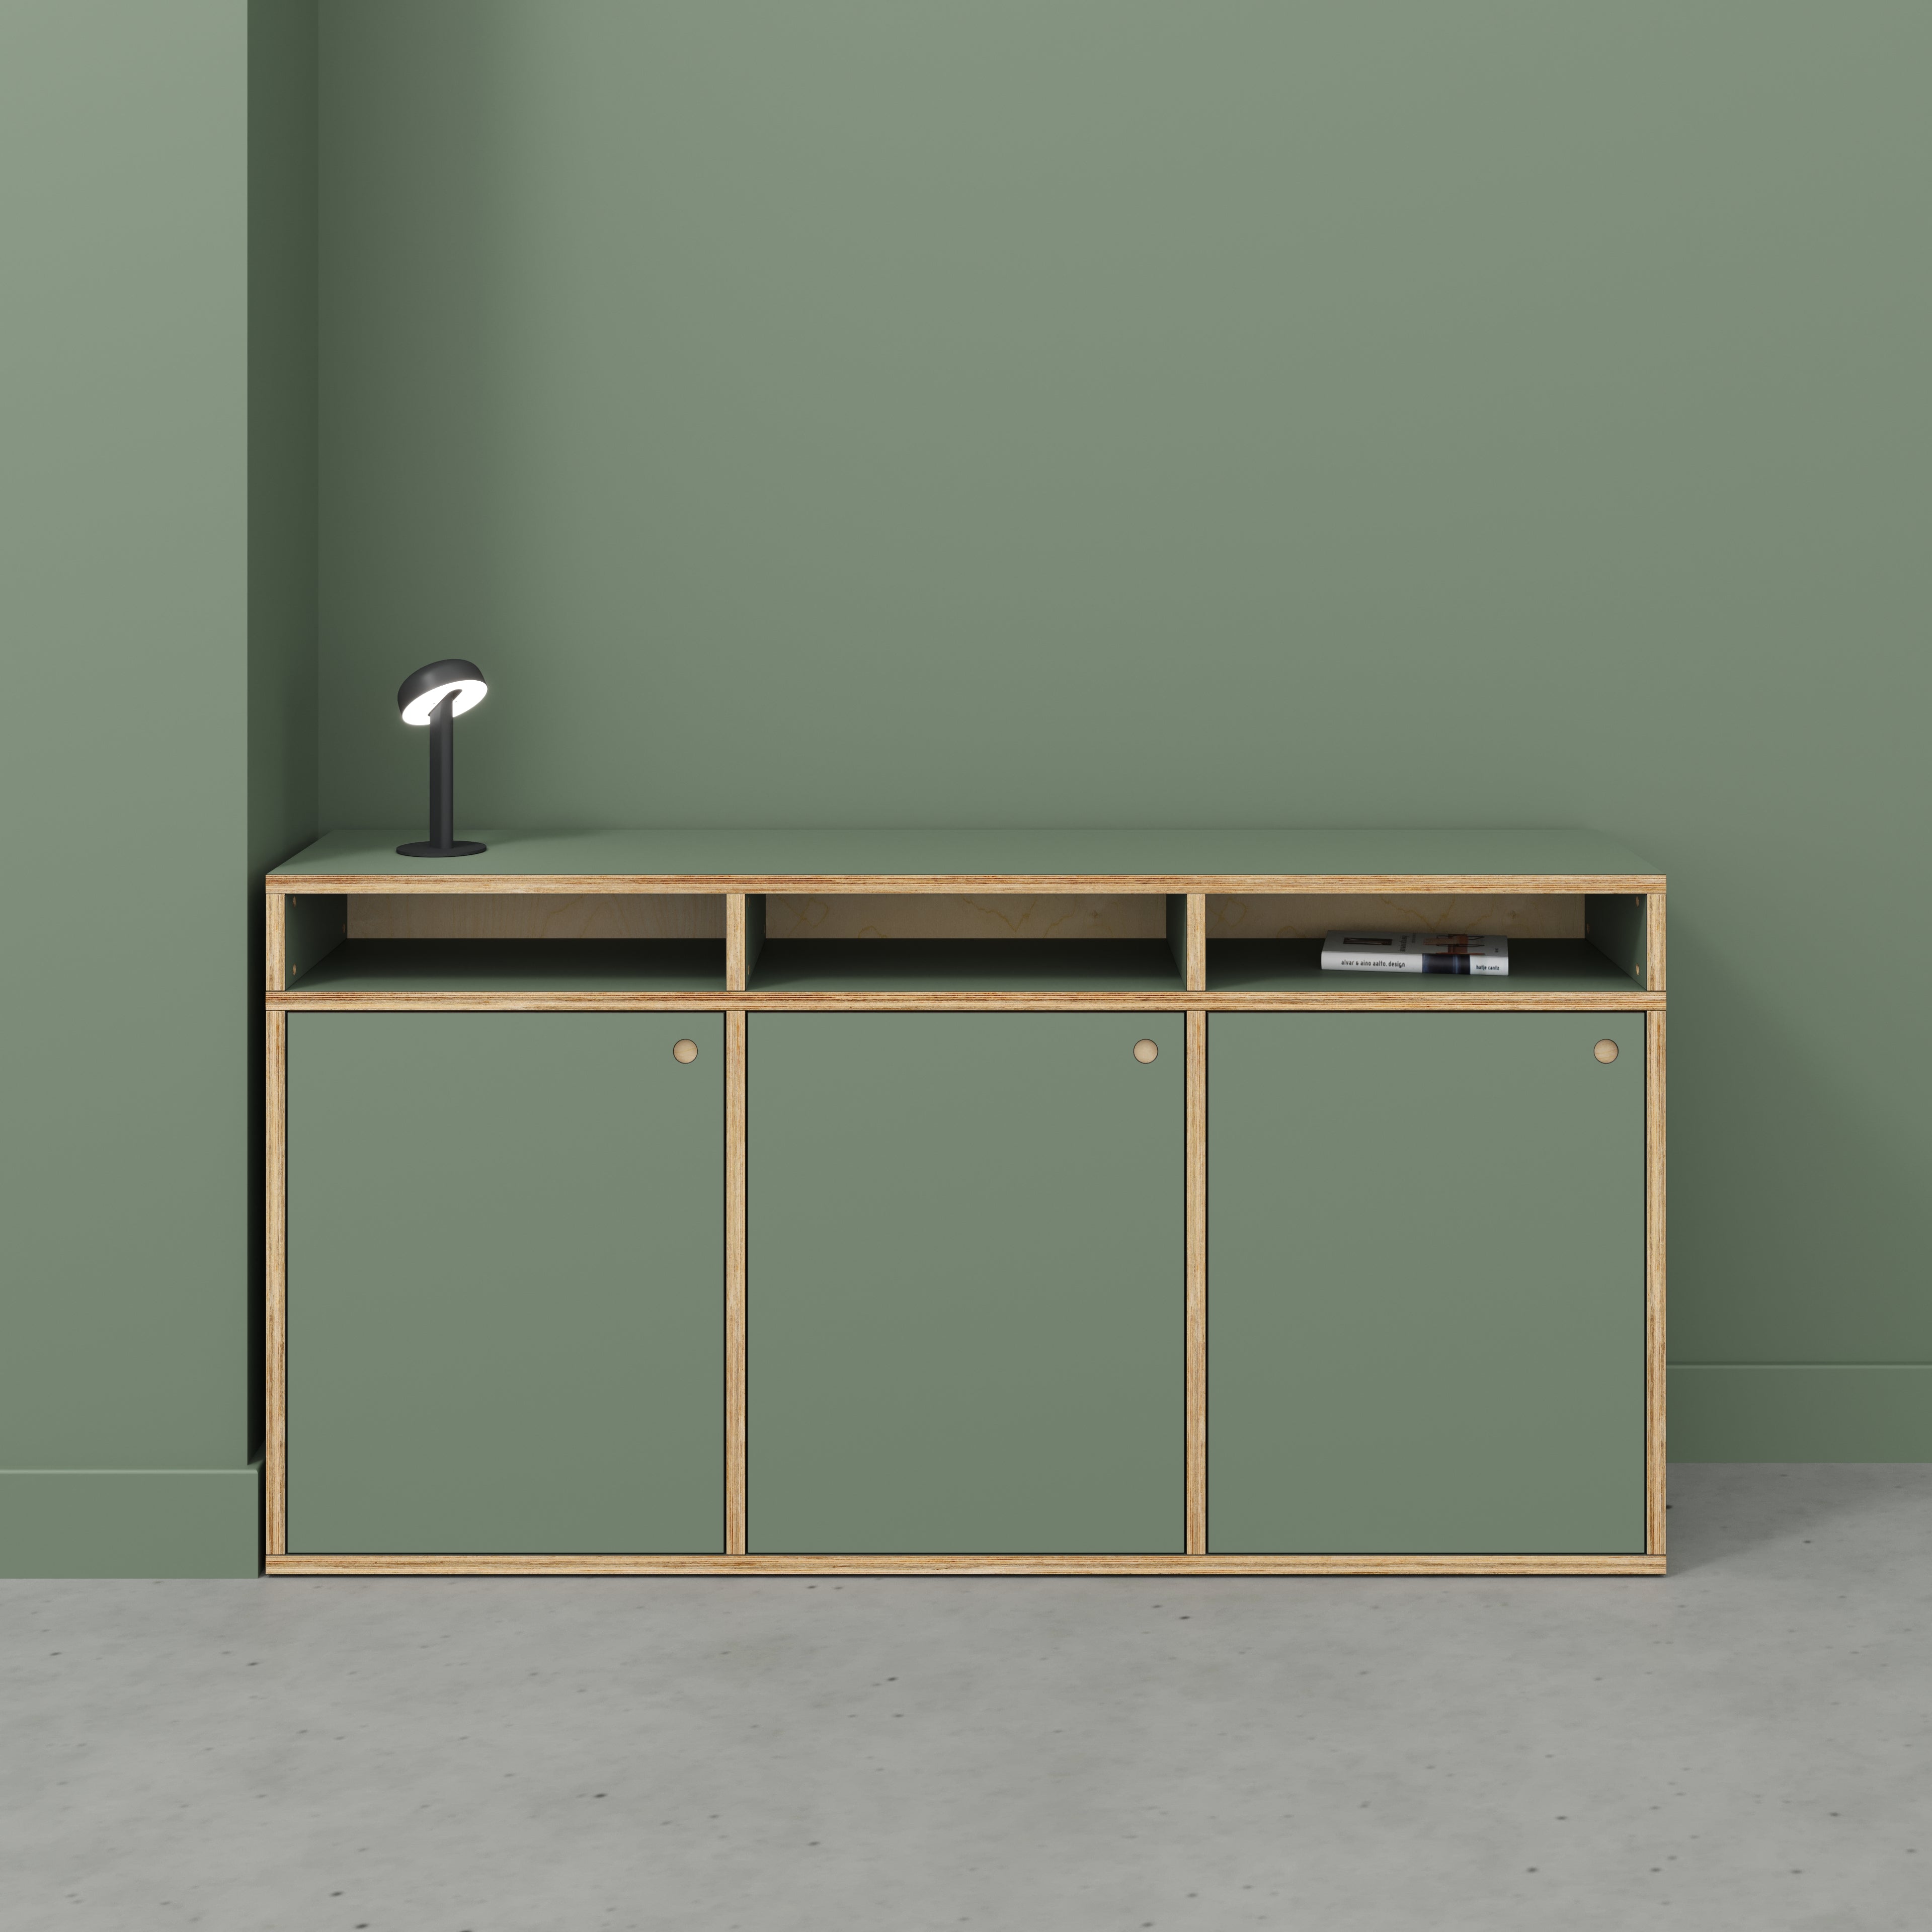 Sideboard - Type 2 - Formica Green Slate - 1800(w) x 400(d) x 900(h)